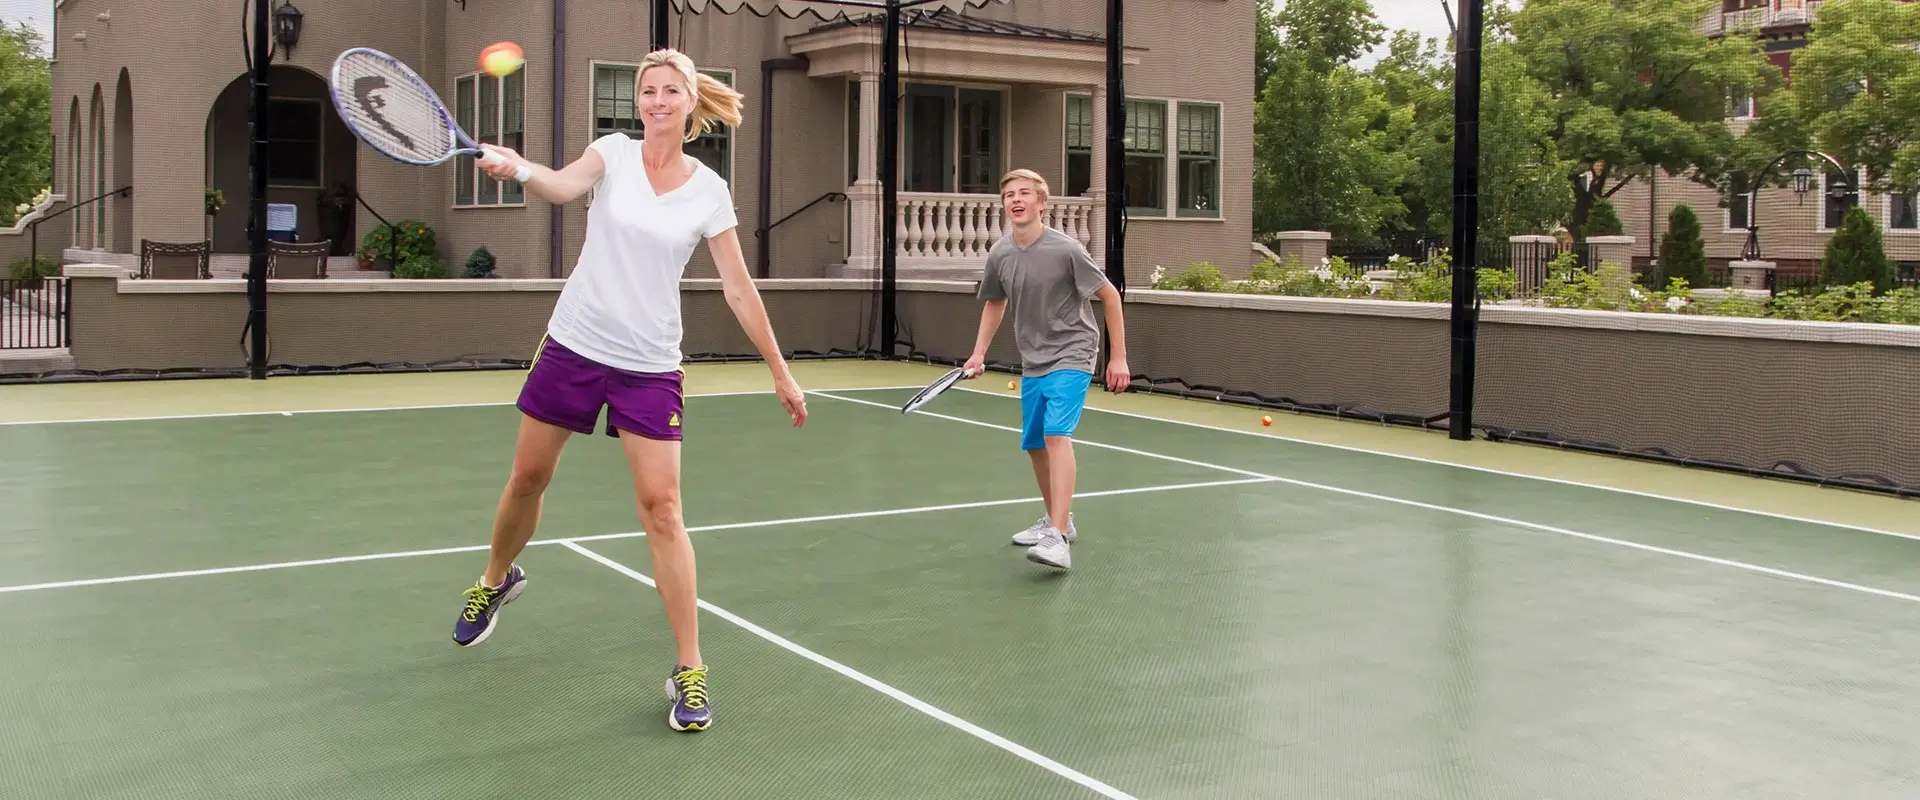 Mother and son play tennis in their backyard